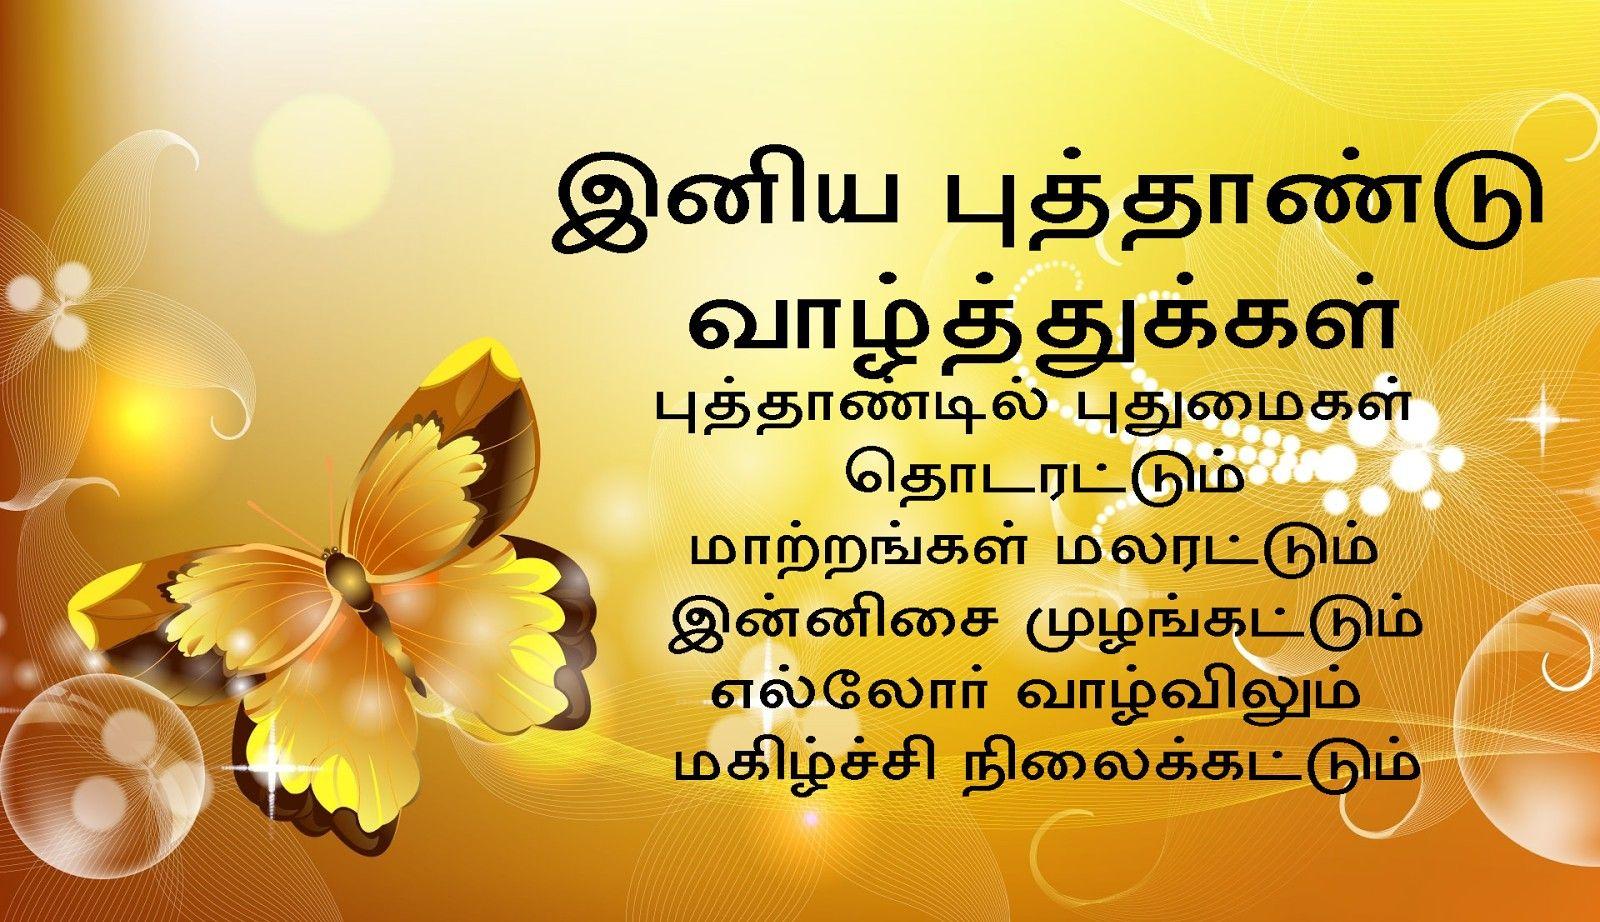 Happy Tamil New Year Wishes Tamil Kavithai HD Wallpaper